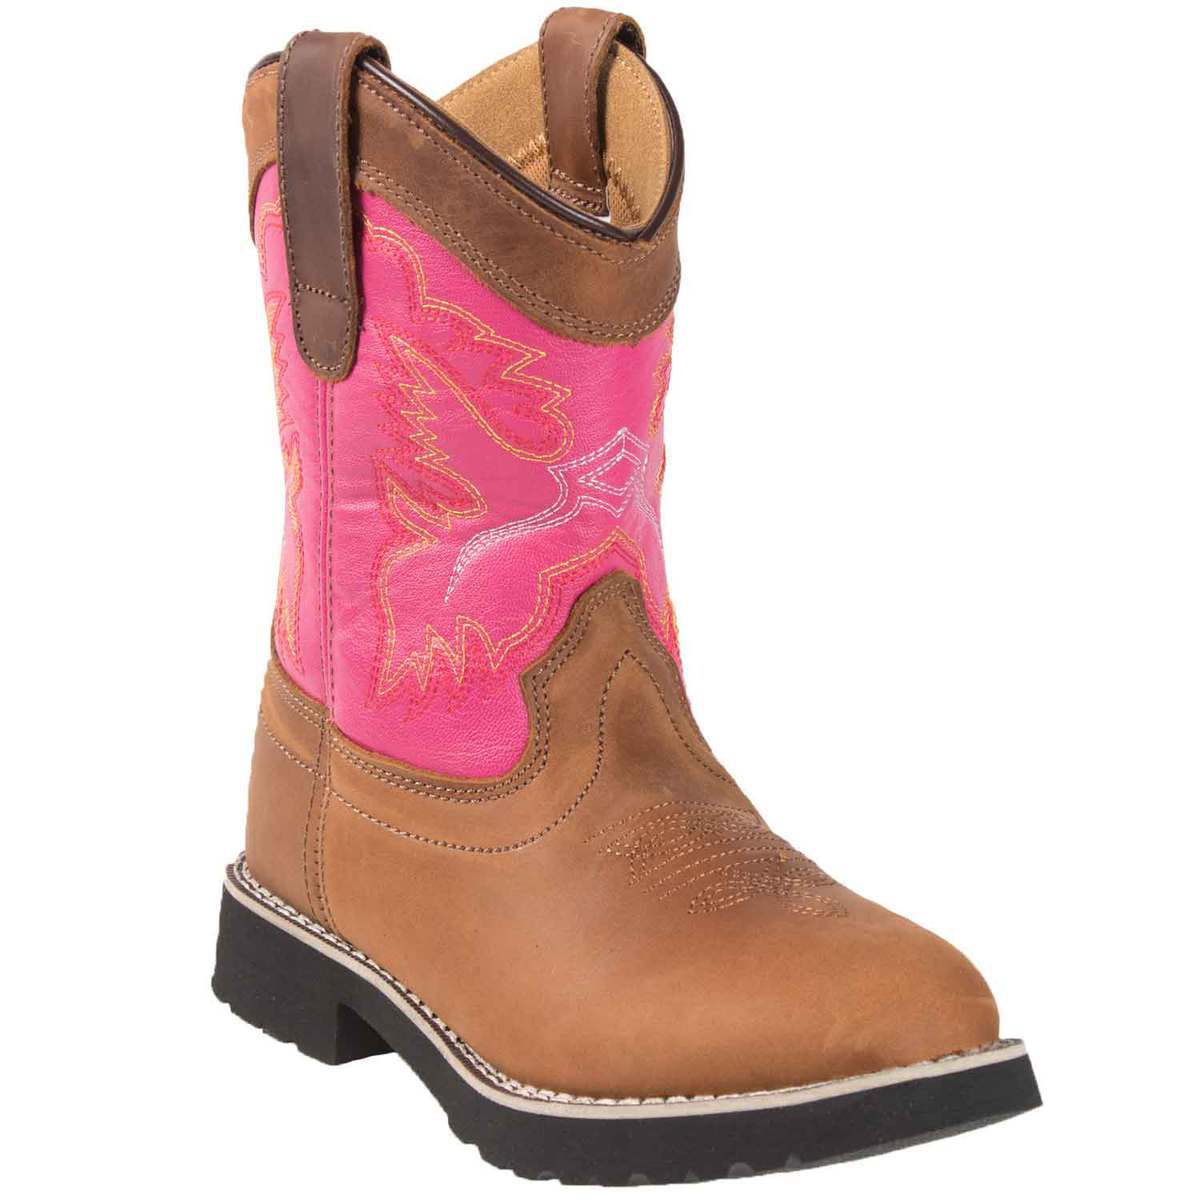 Itasca Youth Buckaroo Pull On Boots - Pink - Size 4 - Pink 4